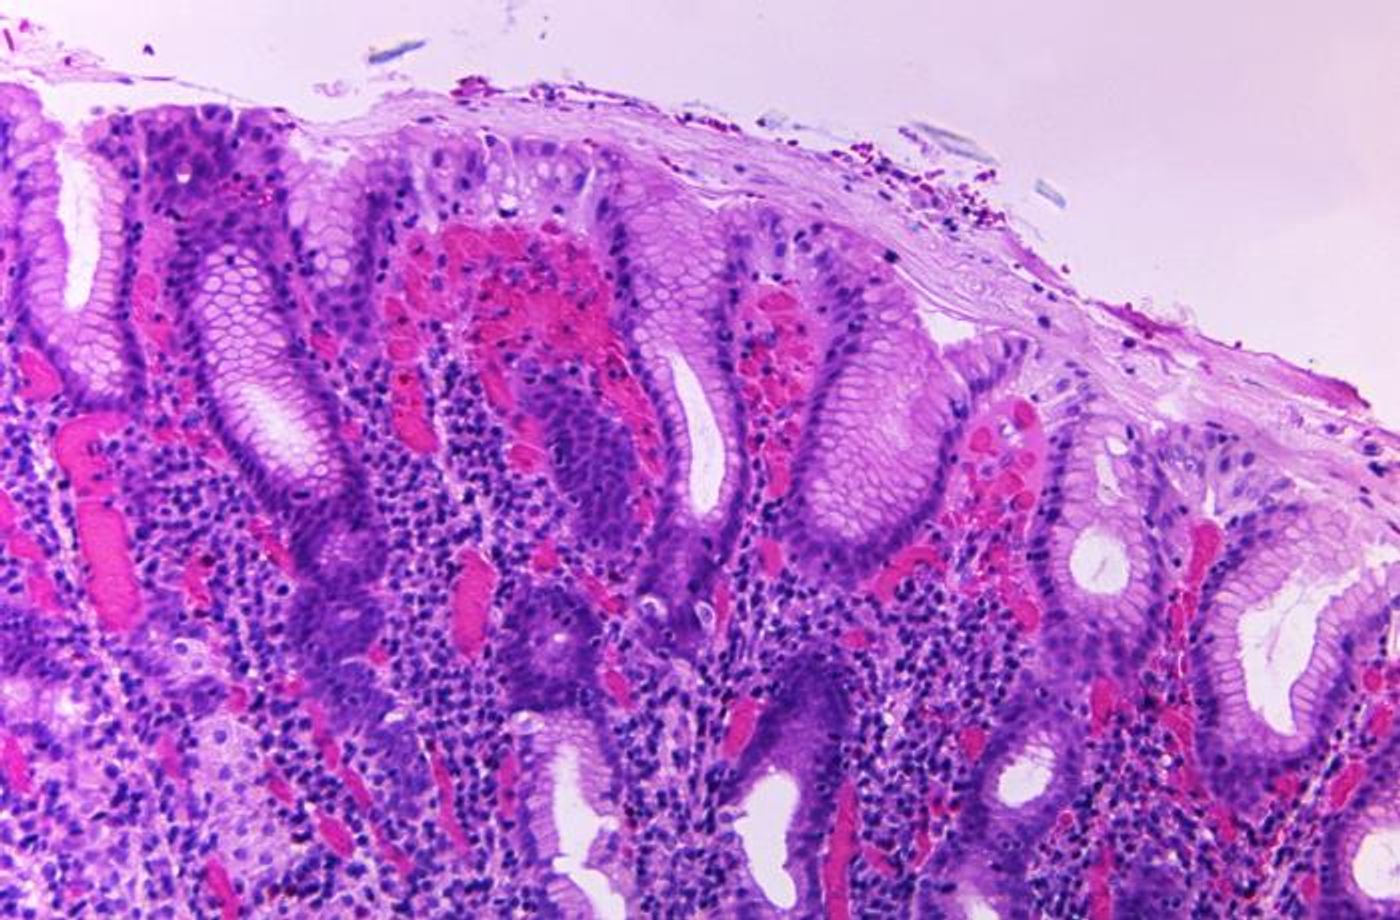 A photomicrograph of a gastric biopsy specimen from a cholera patient, revealing acute and chronic gastritis; Vibrio cholerae bacteria are thought to multiply in the overlying mucus membrane of the gastric mucosal epithelium. / Credit: CDC/ Dr. Gangarosa